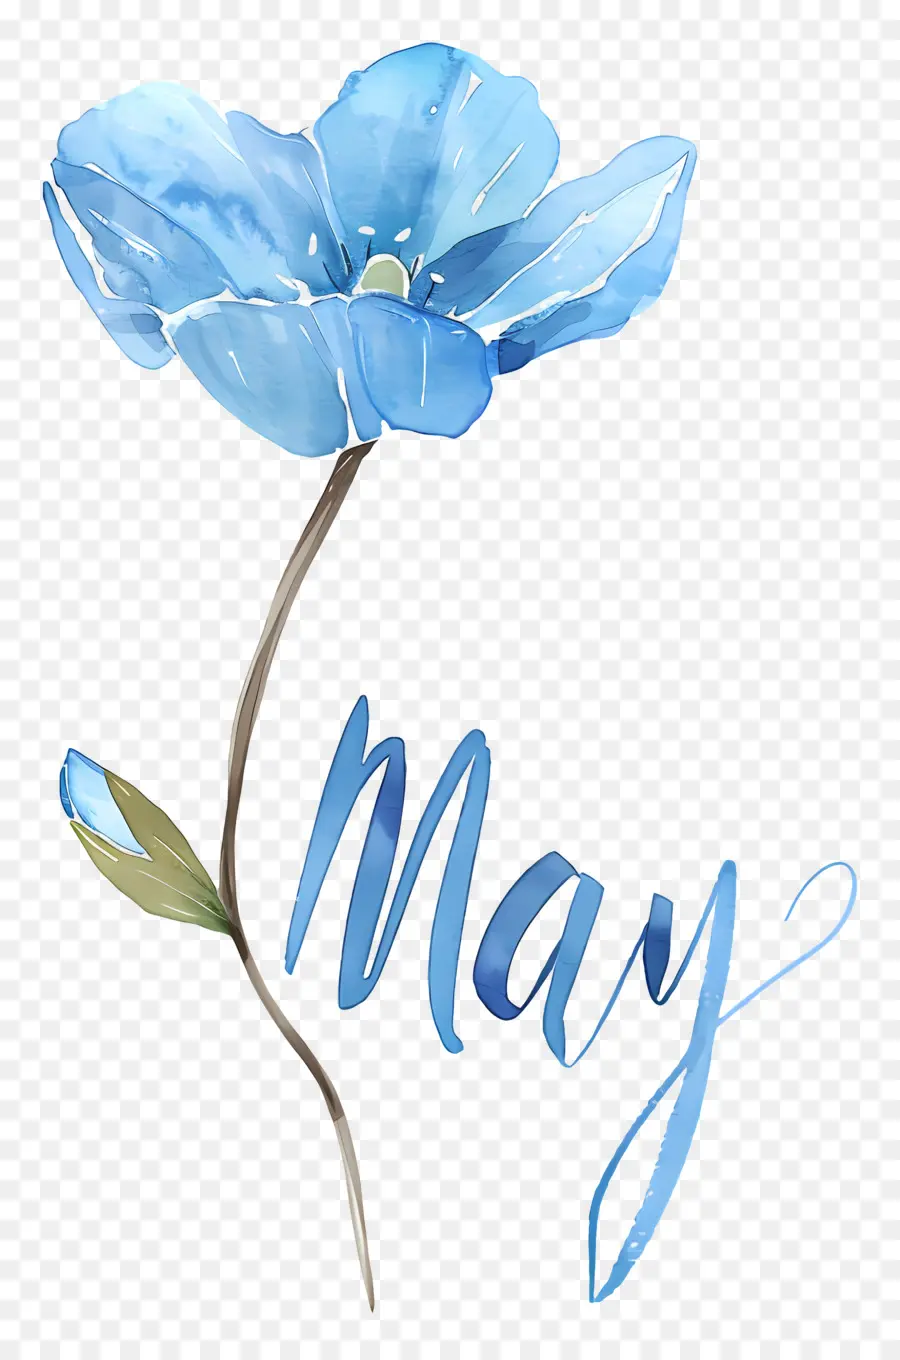 Hola De Mayo，Watercolor Flower PNG